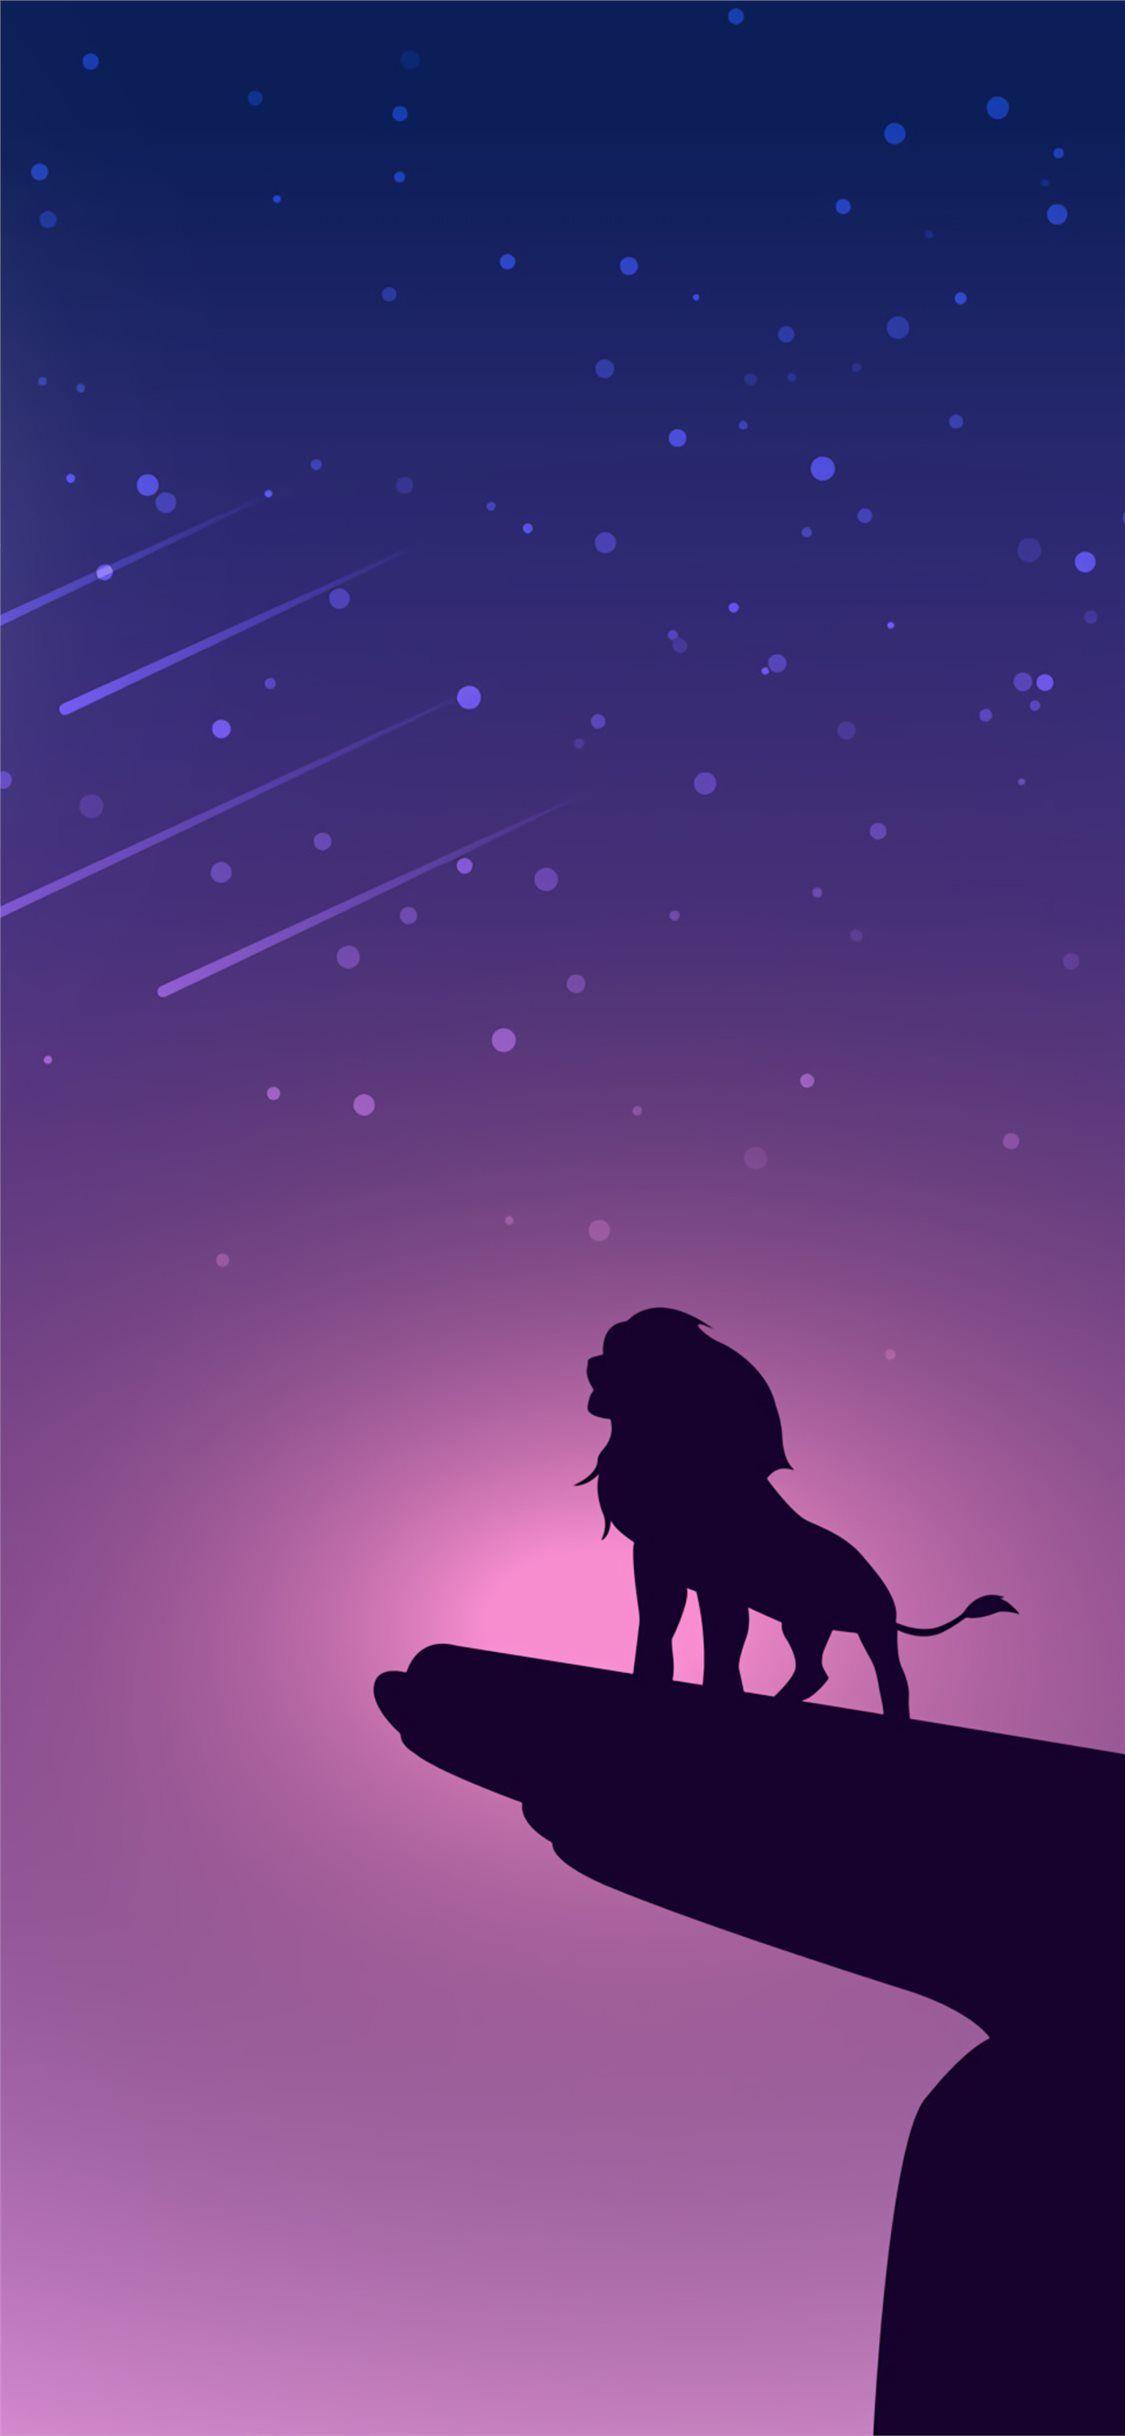 The lion king 2019 phone wallpaper - The Lion King